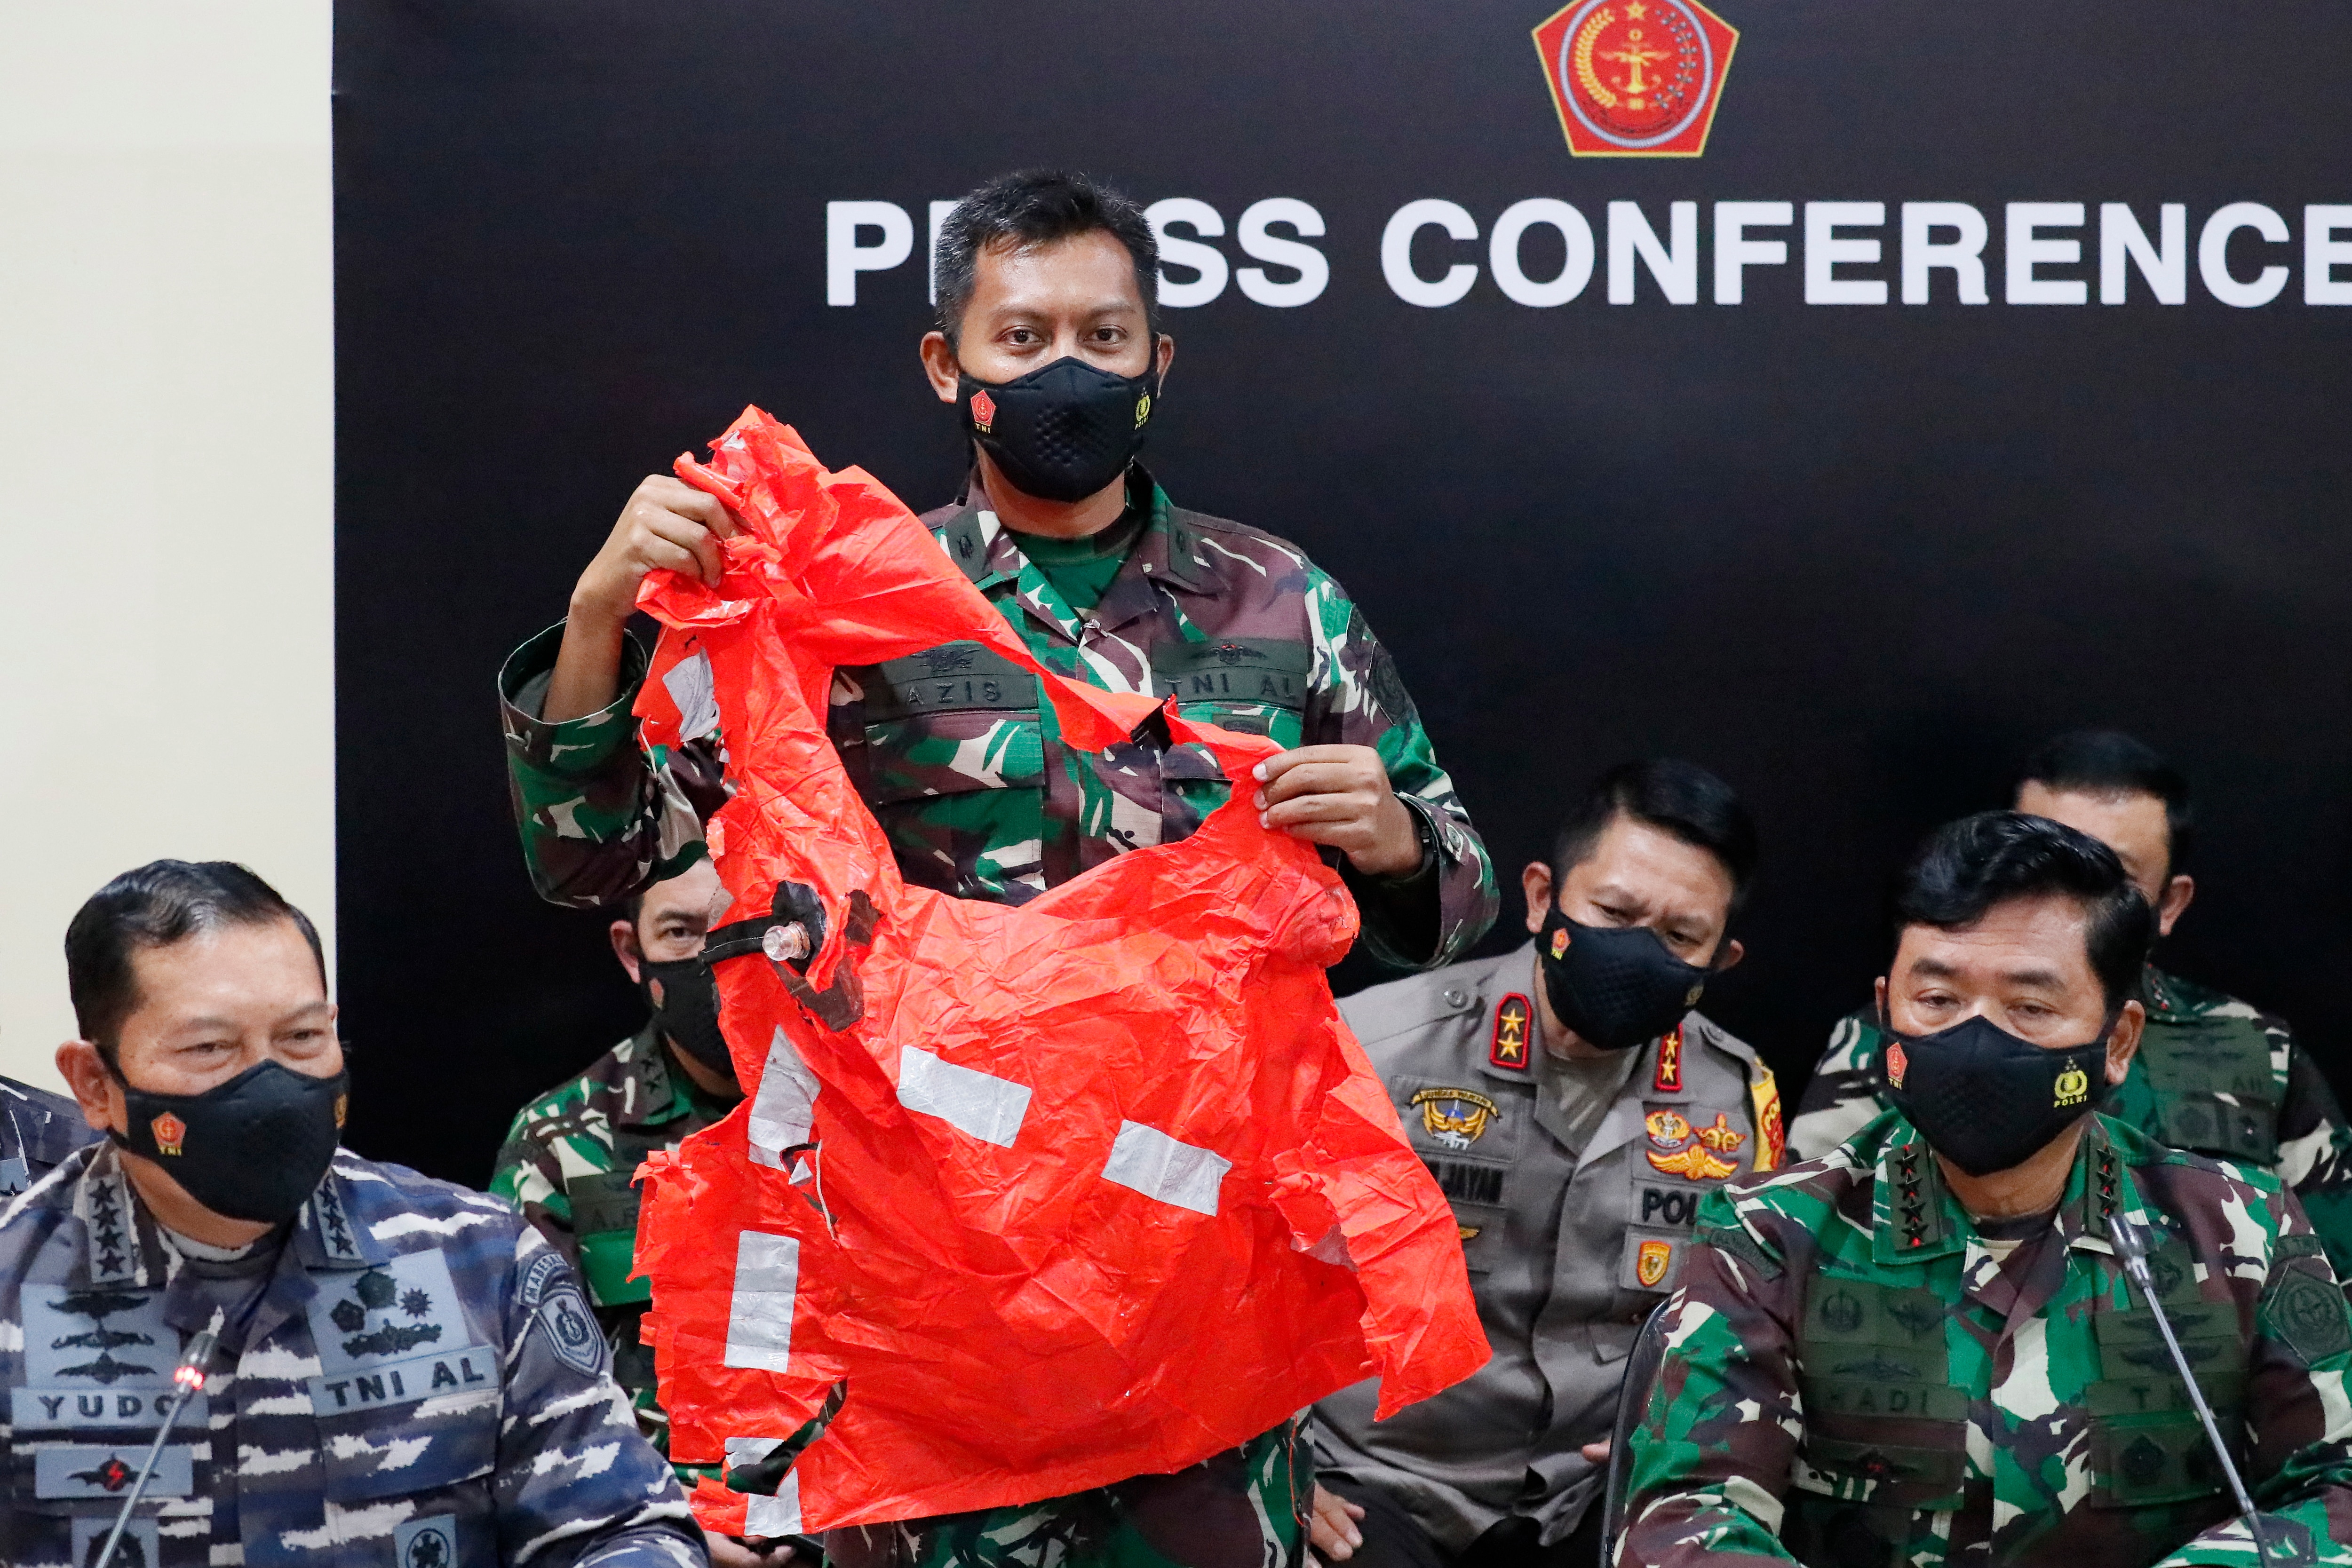 A military officer shows a safety escape suit believed to be from the Indonesian submarine during a press conference in Bali, Indonesia, on 25 April.